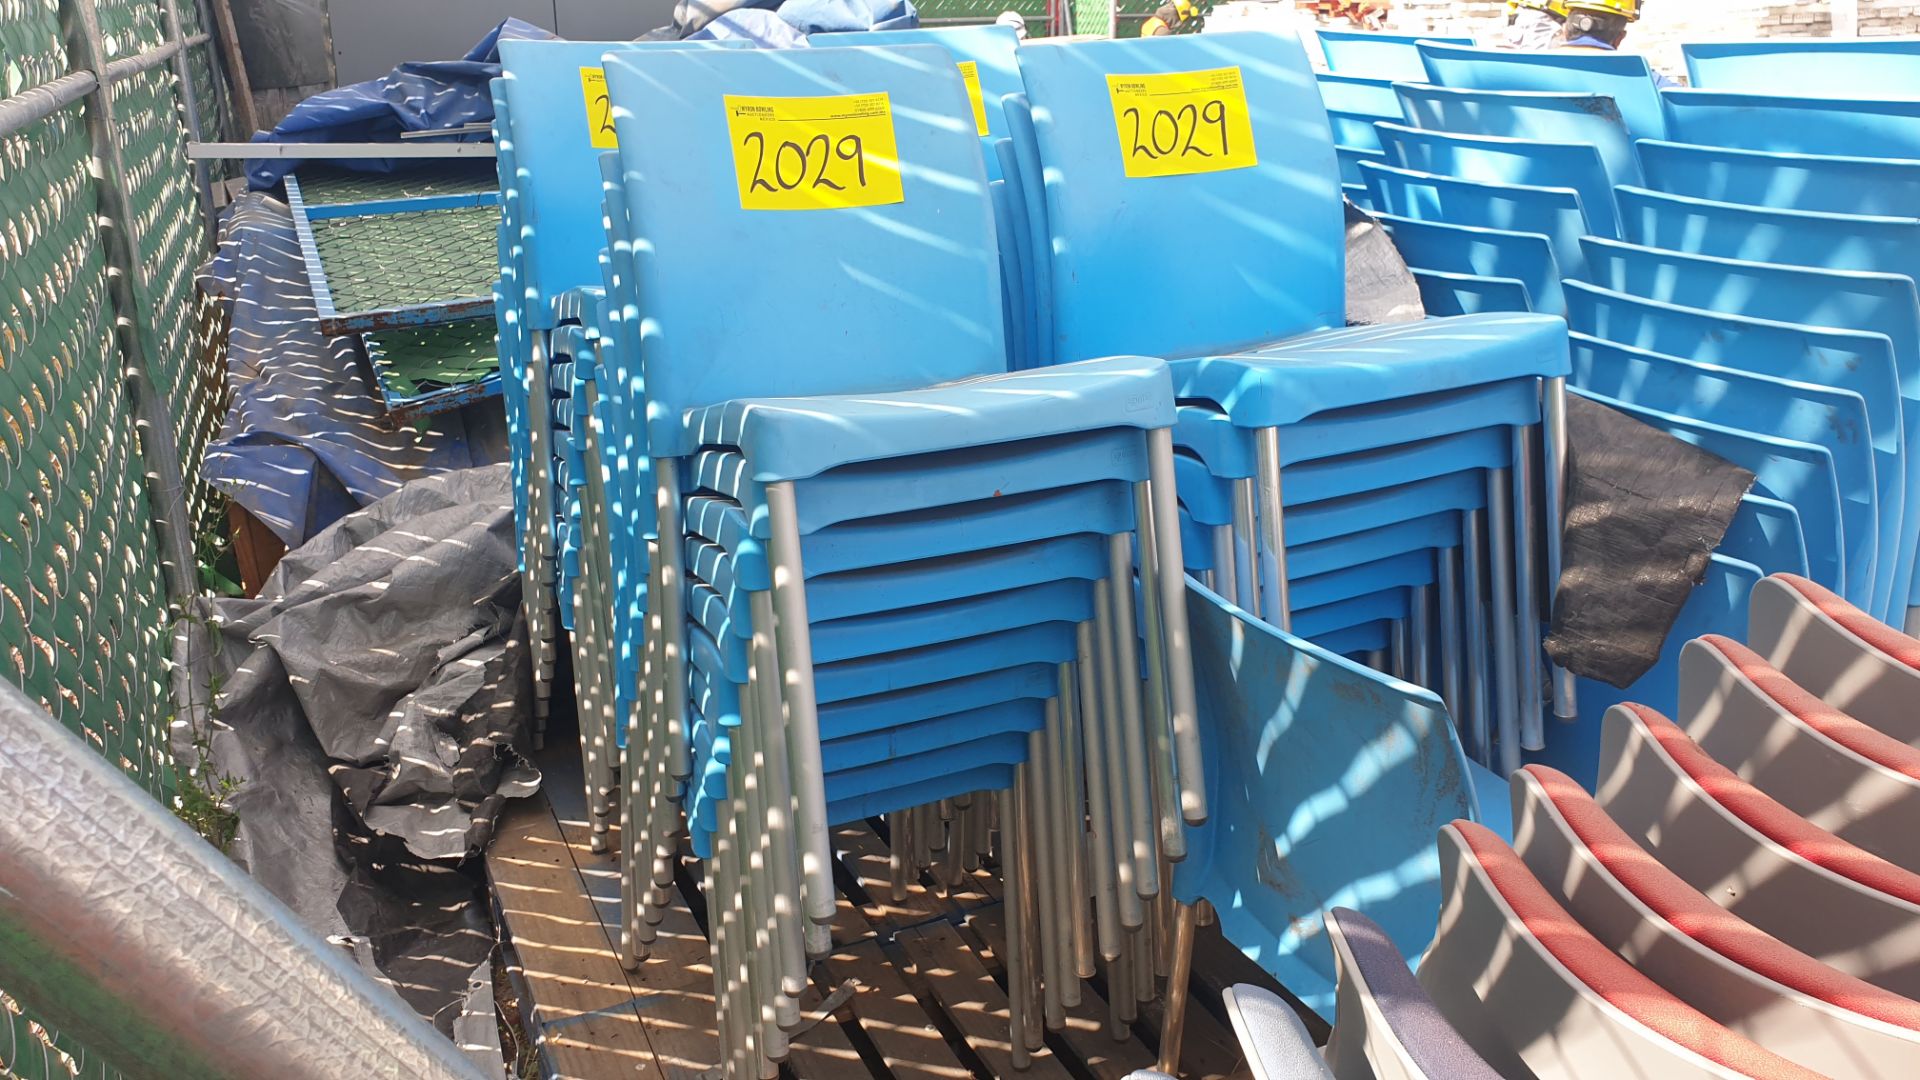 1 Lote of 40 blue plastic chairs, 7 metal chairs for office with backrest and upholstered seat - Bild 18 aus 22